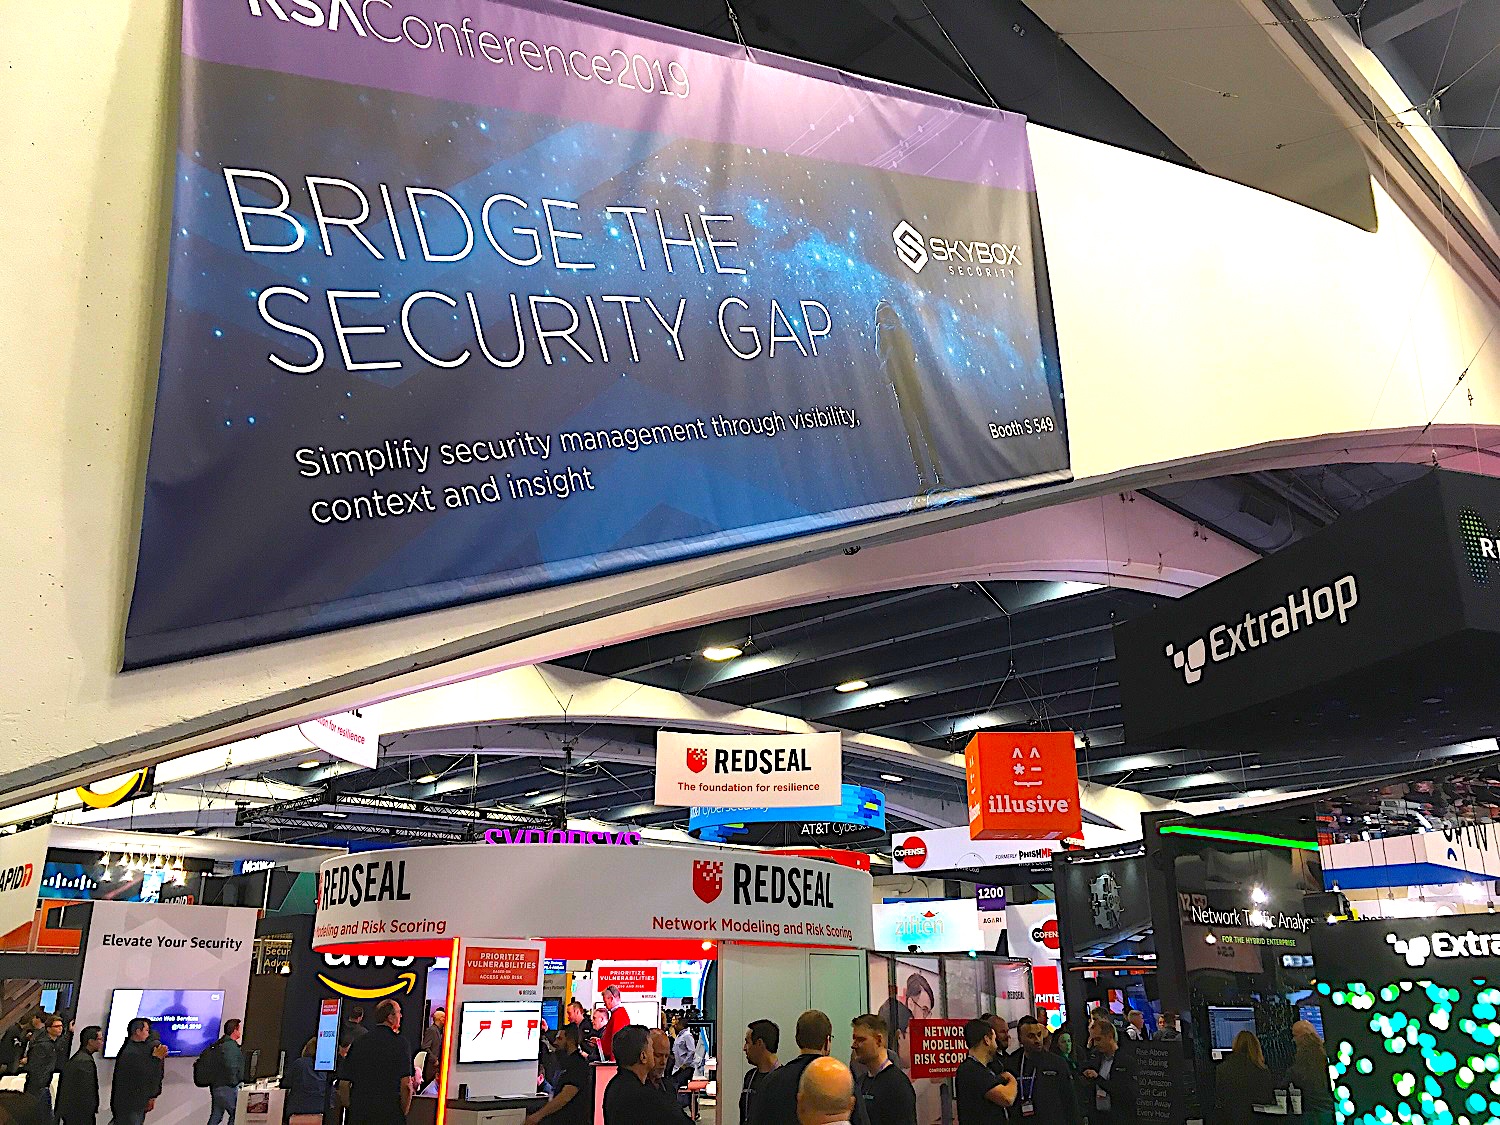 At RSA Conference, look for 'postperimeter' security to dominate